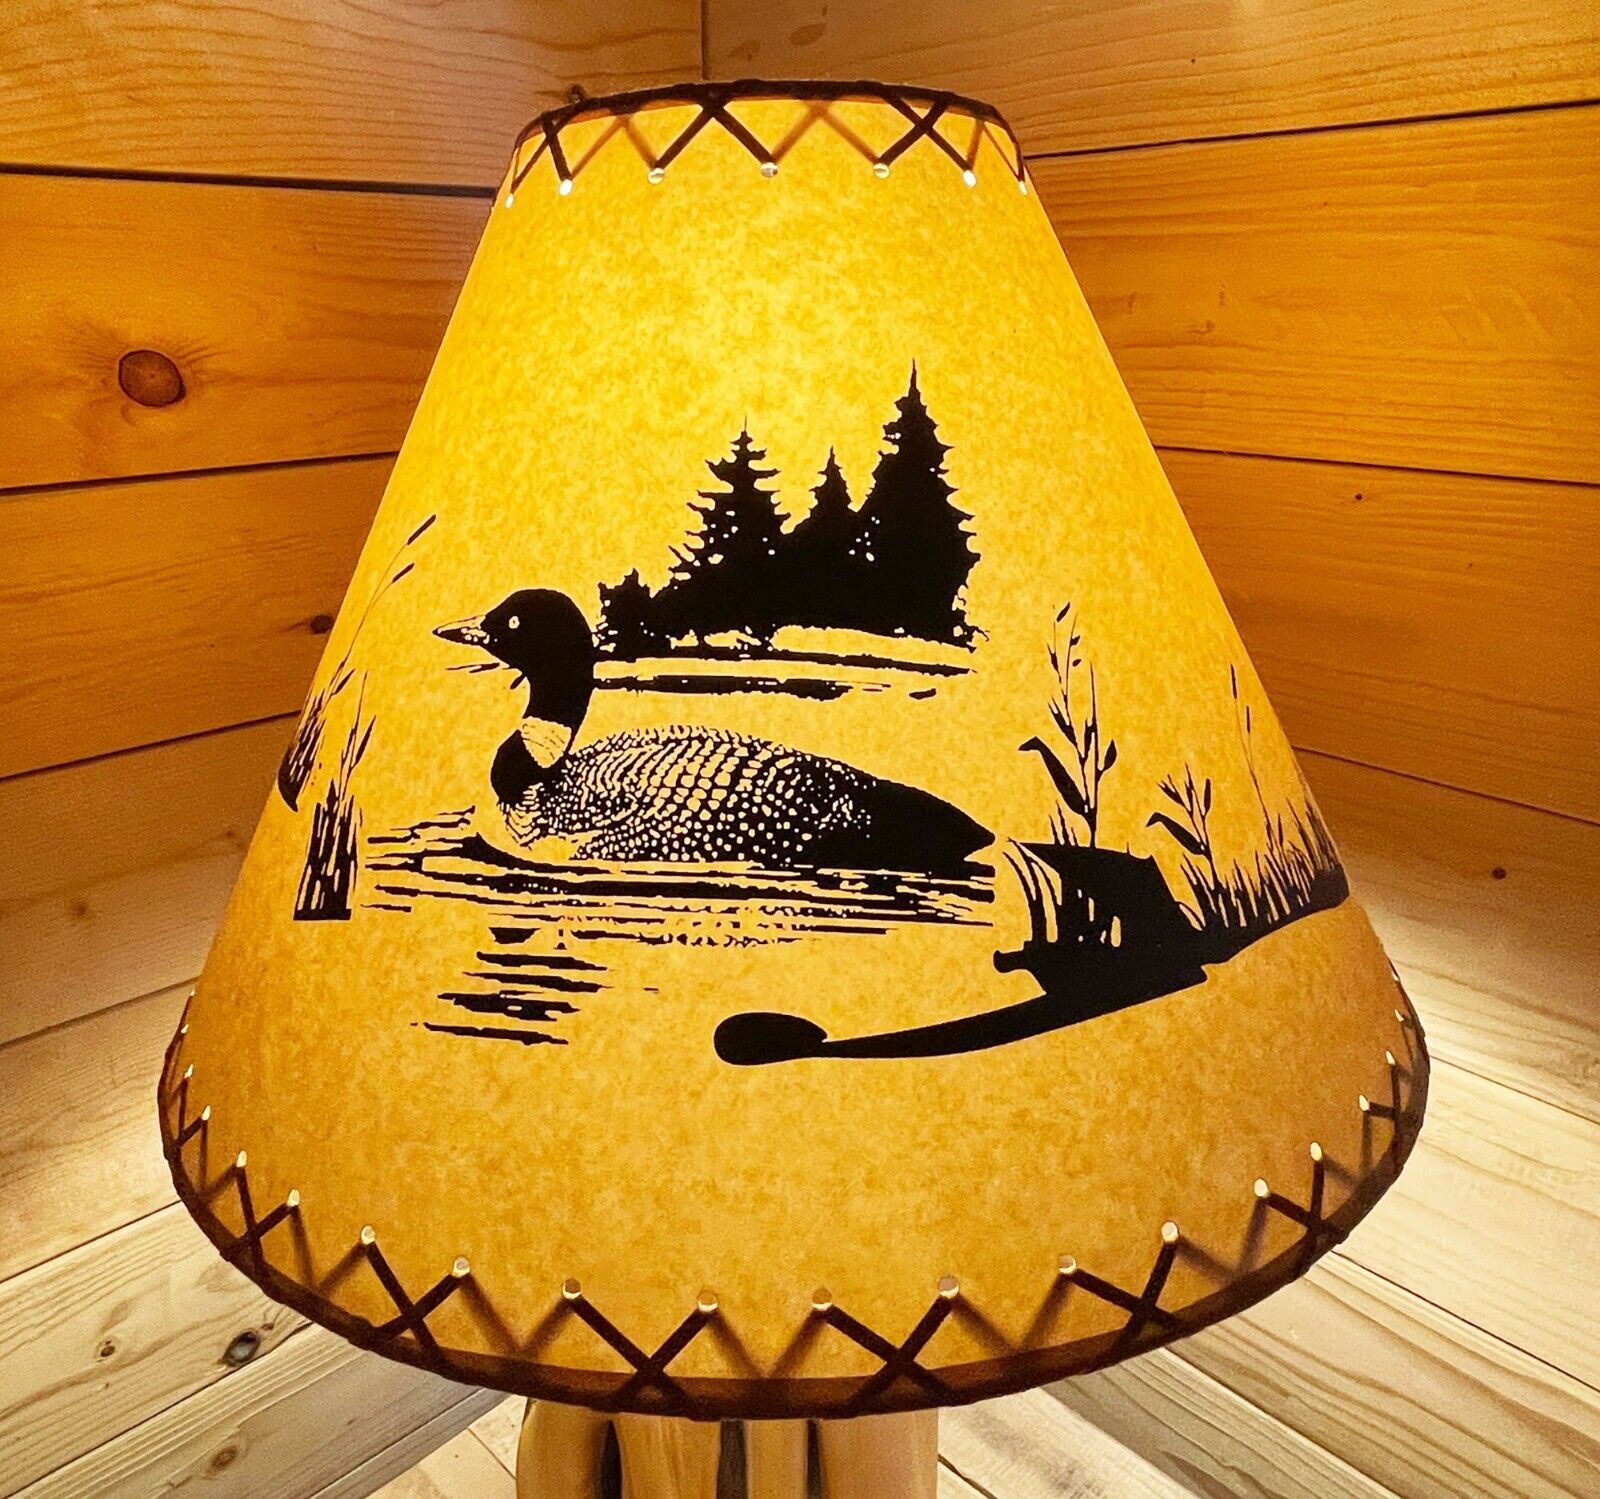 Rustic Oiled Kraft Lamp Shade with Loon on Lake Design - 18\